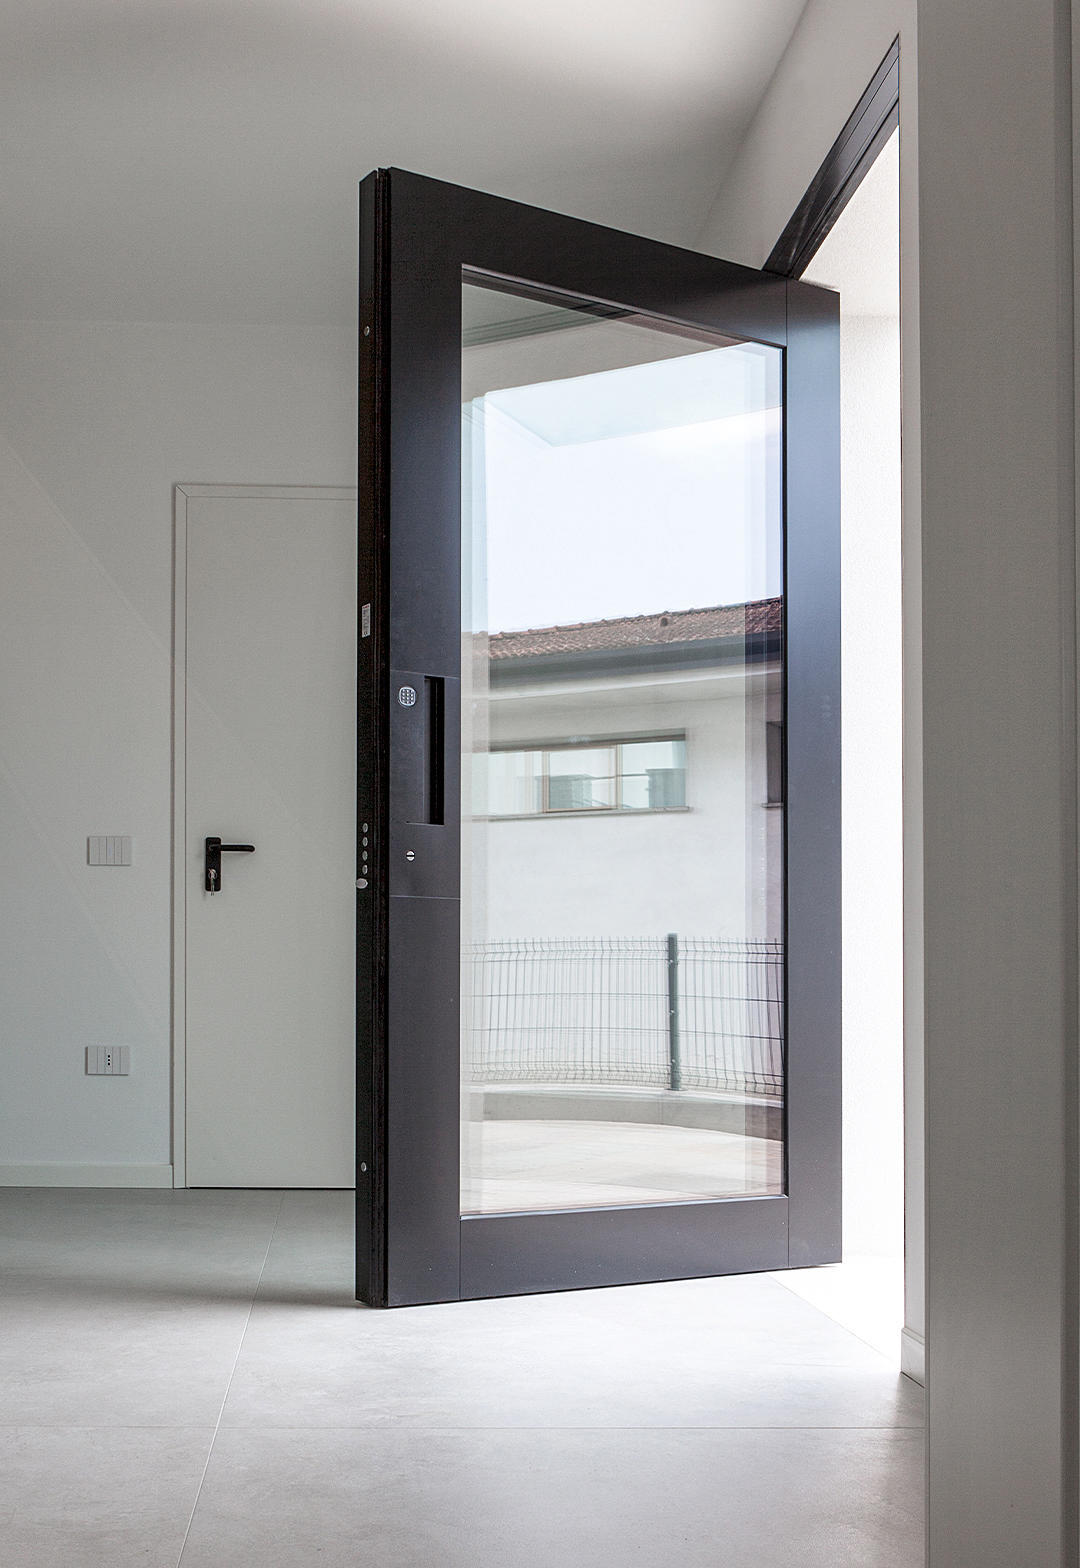 Nova | The pivoting safety door with glass elements that allows ...